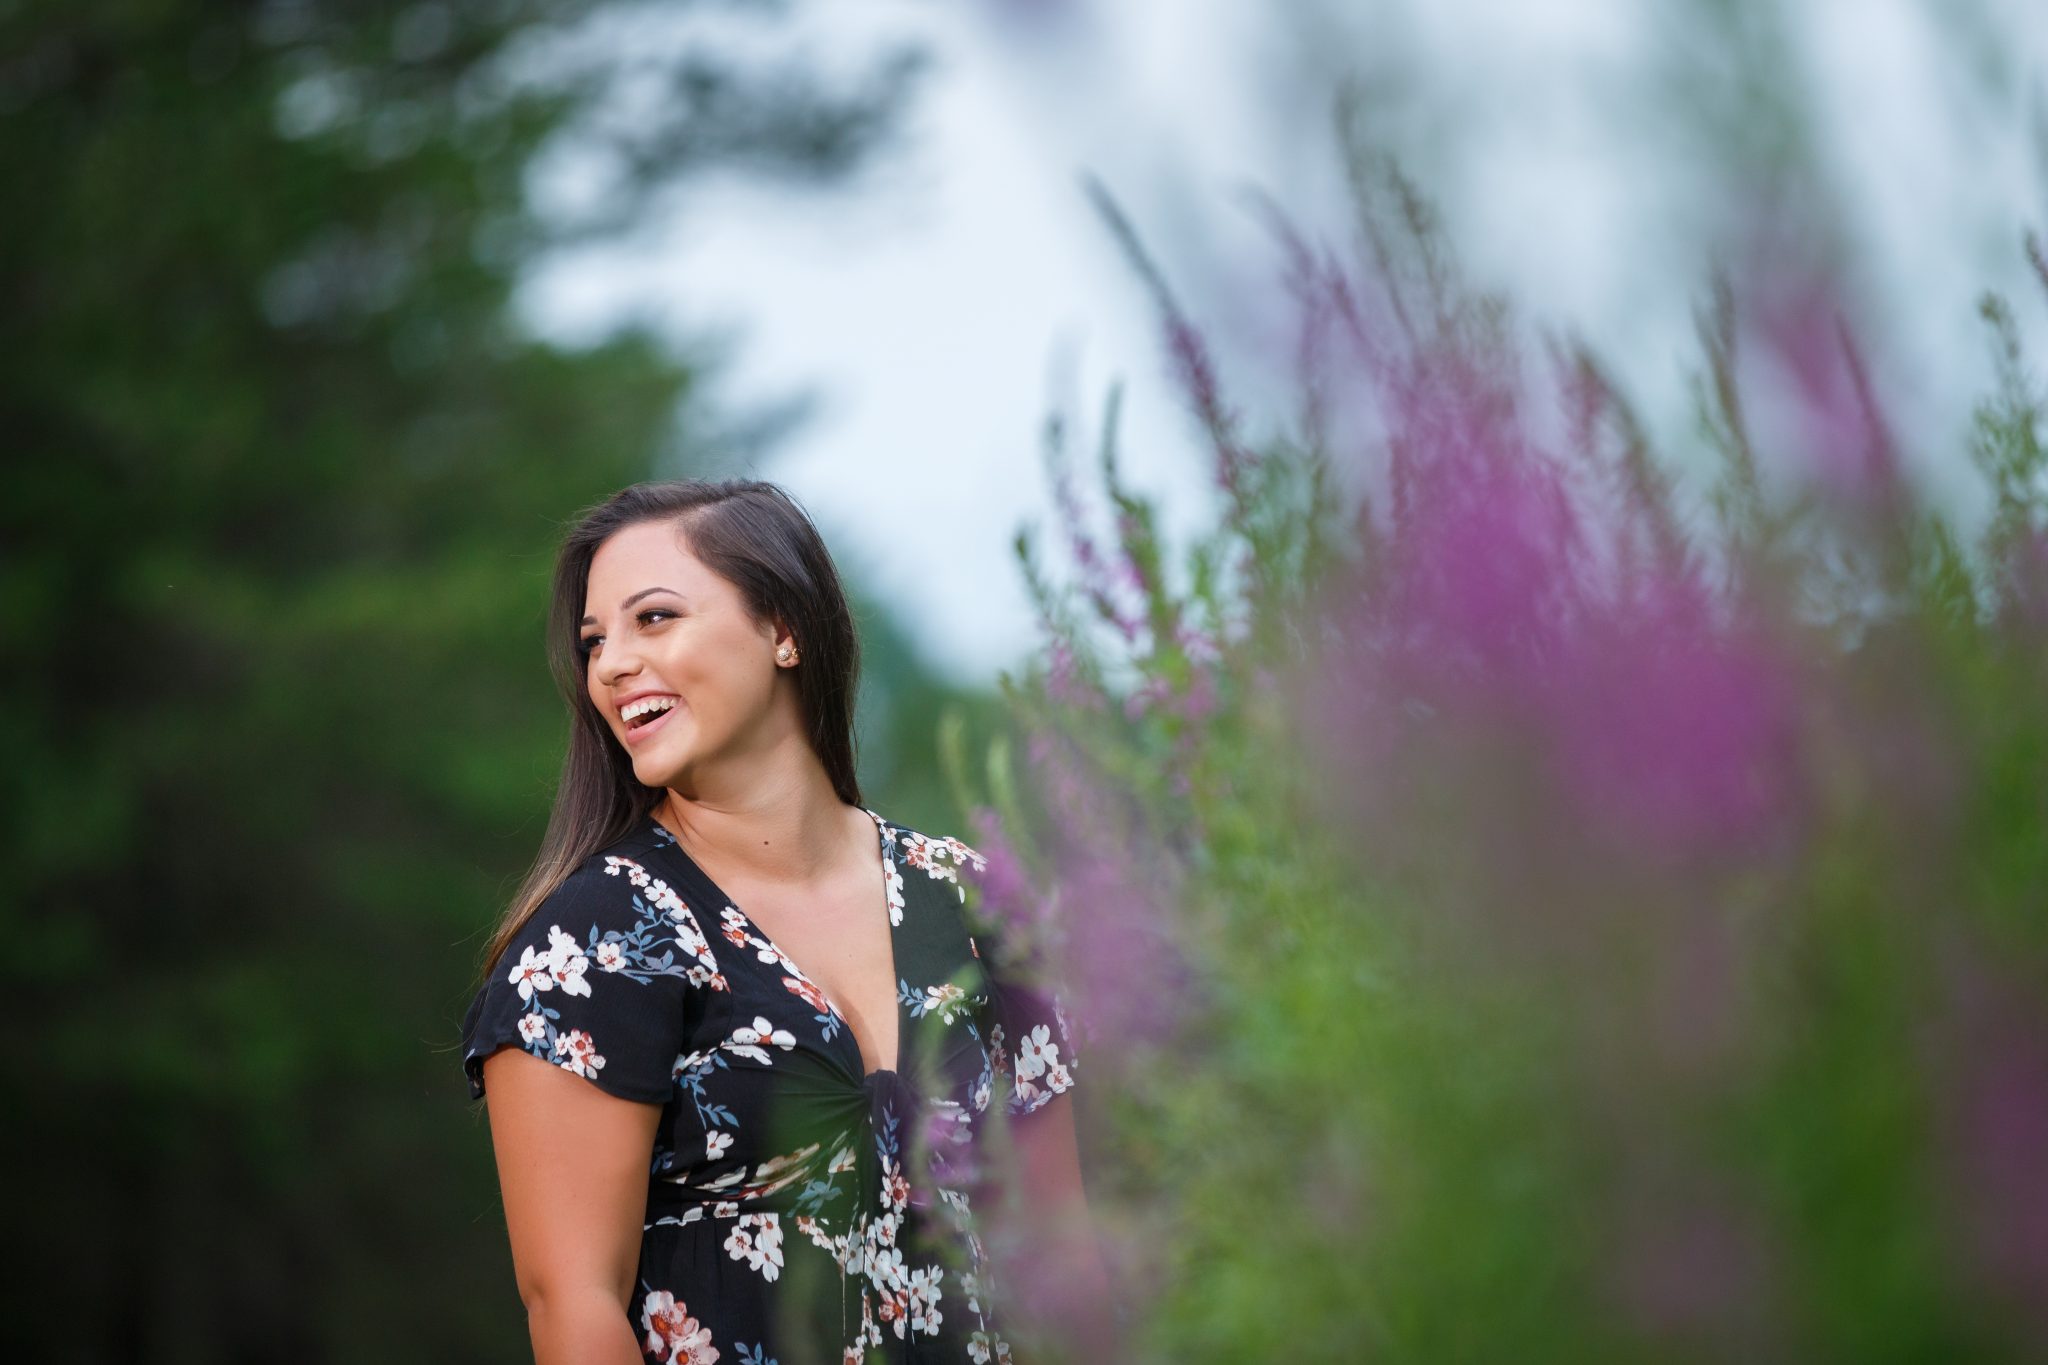 High School Senior Girl laughing with purple flowers in the foreground